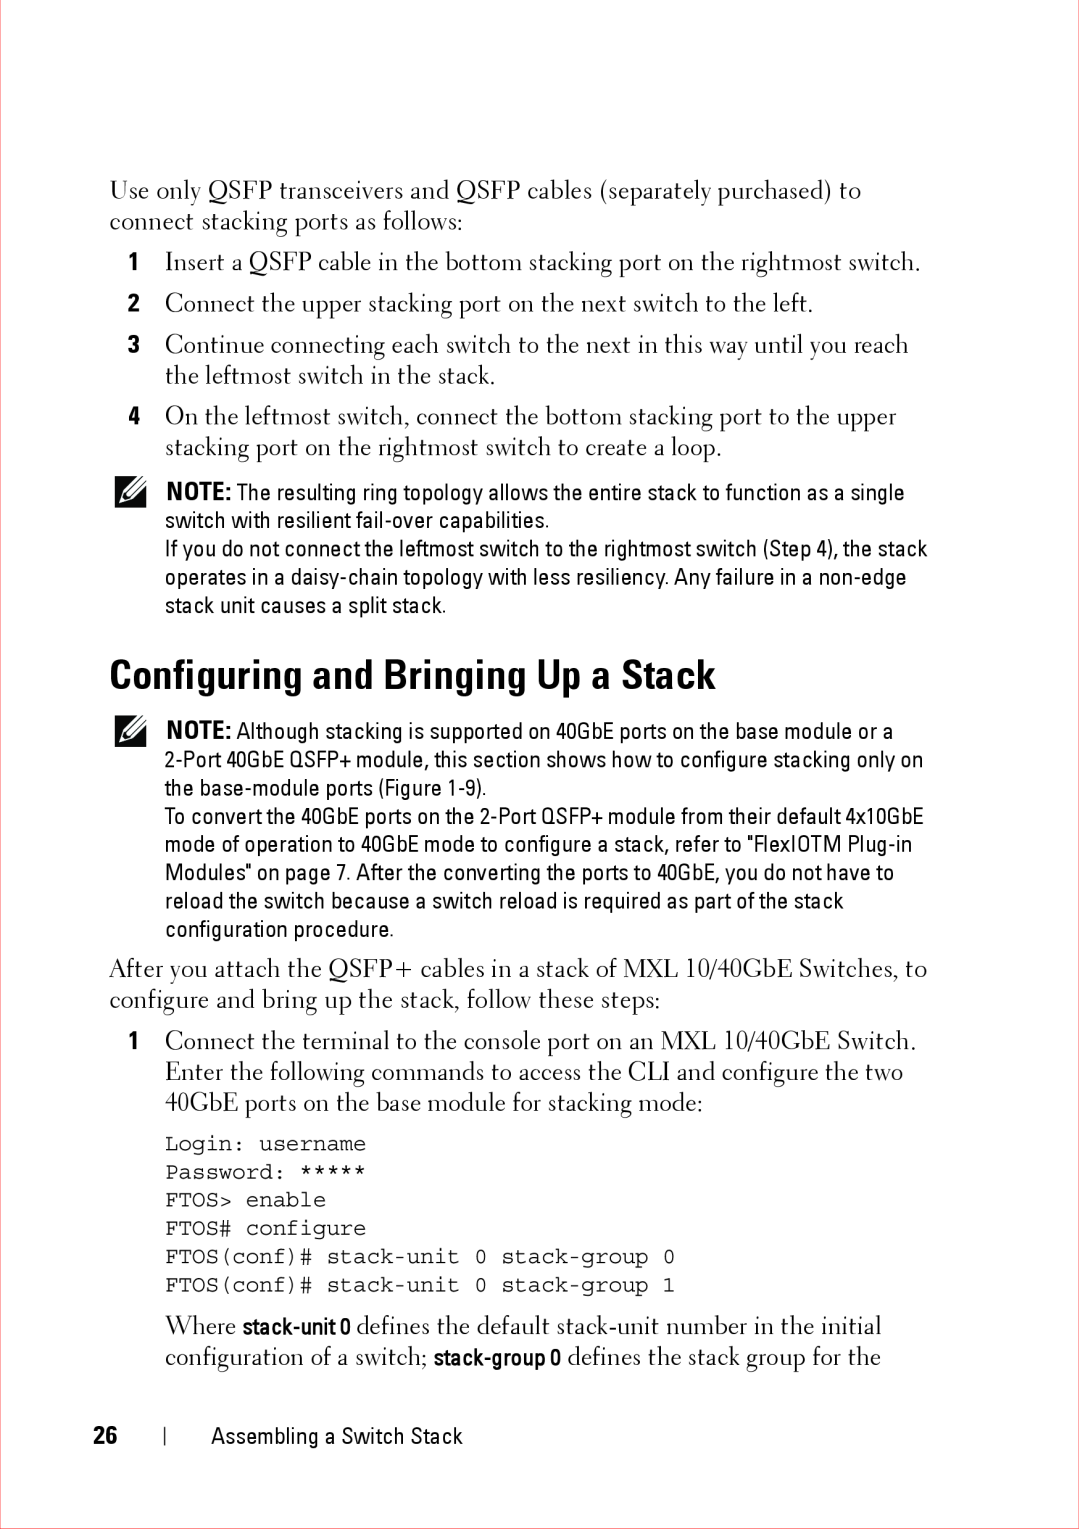 Force10 Networks CC-C-BLNK-LC manual Configuring and Bringing Up a Stack 